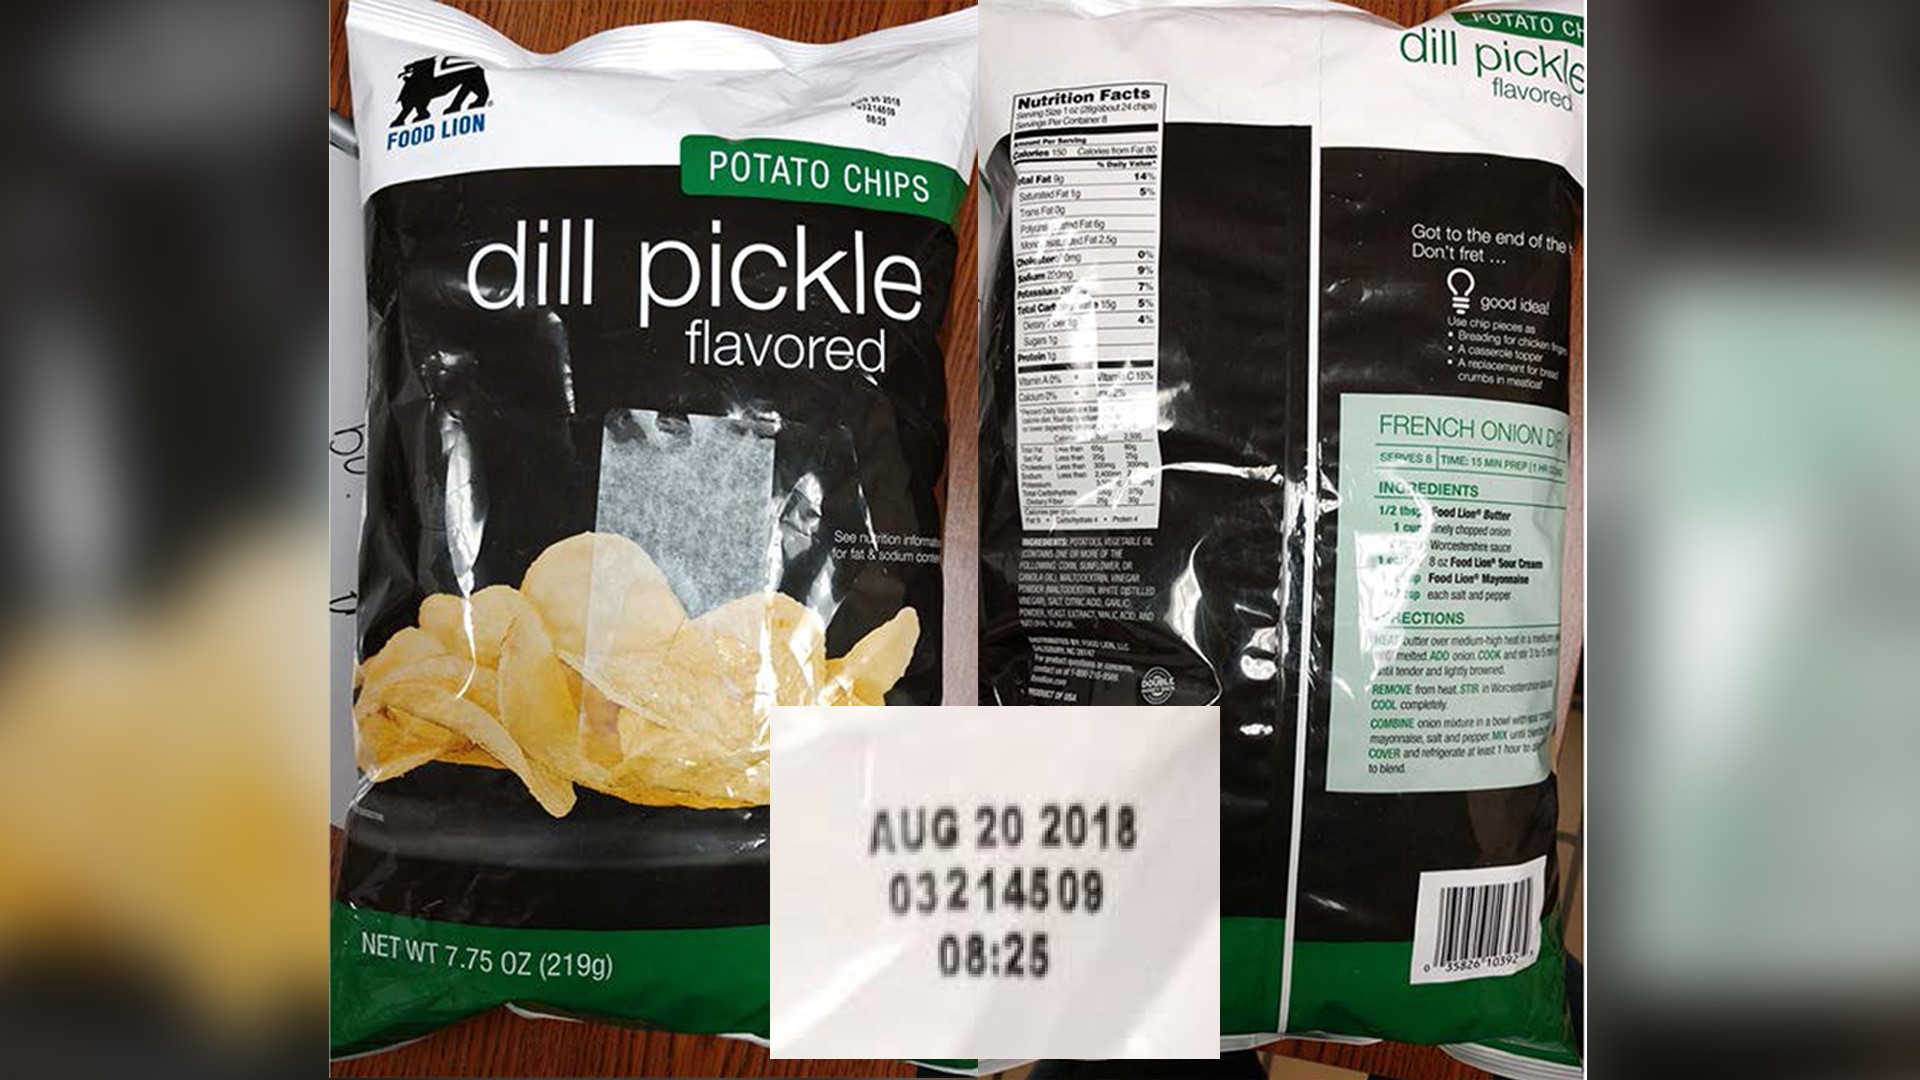 Food Lion Dill Pickle flavored potato chips recalled